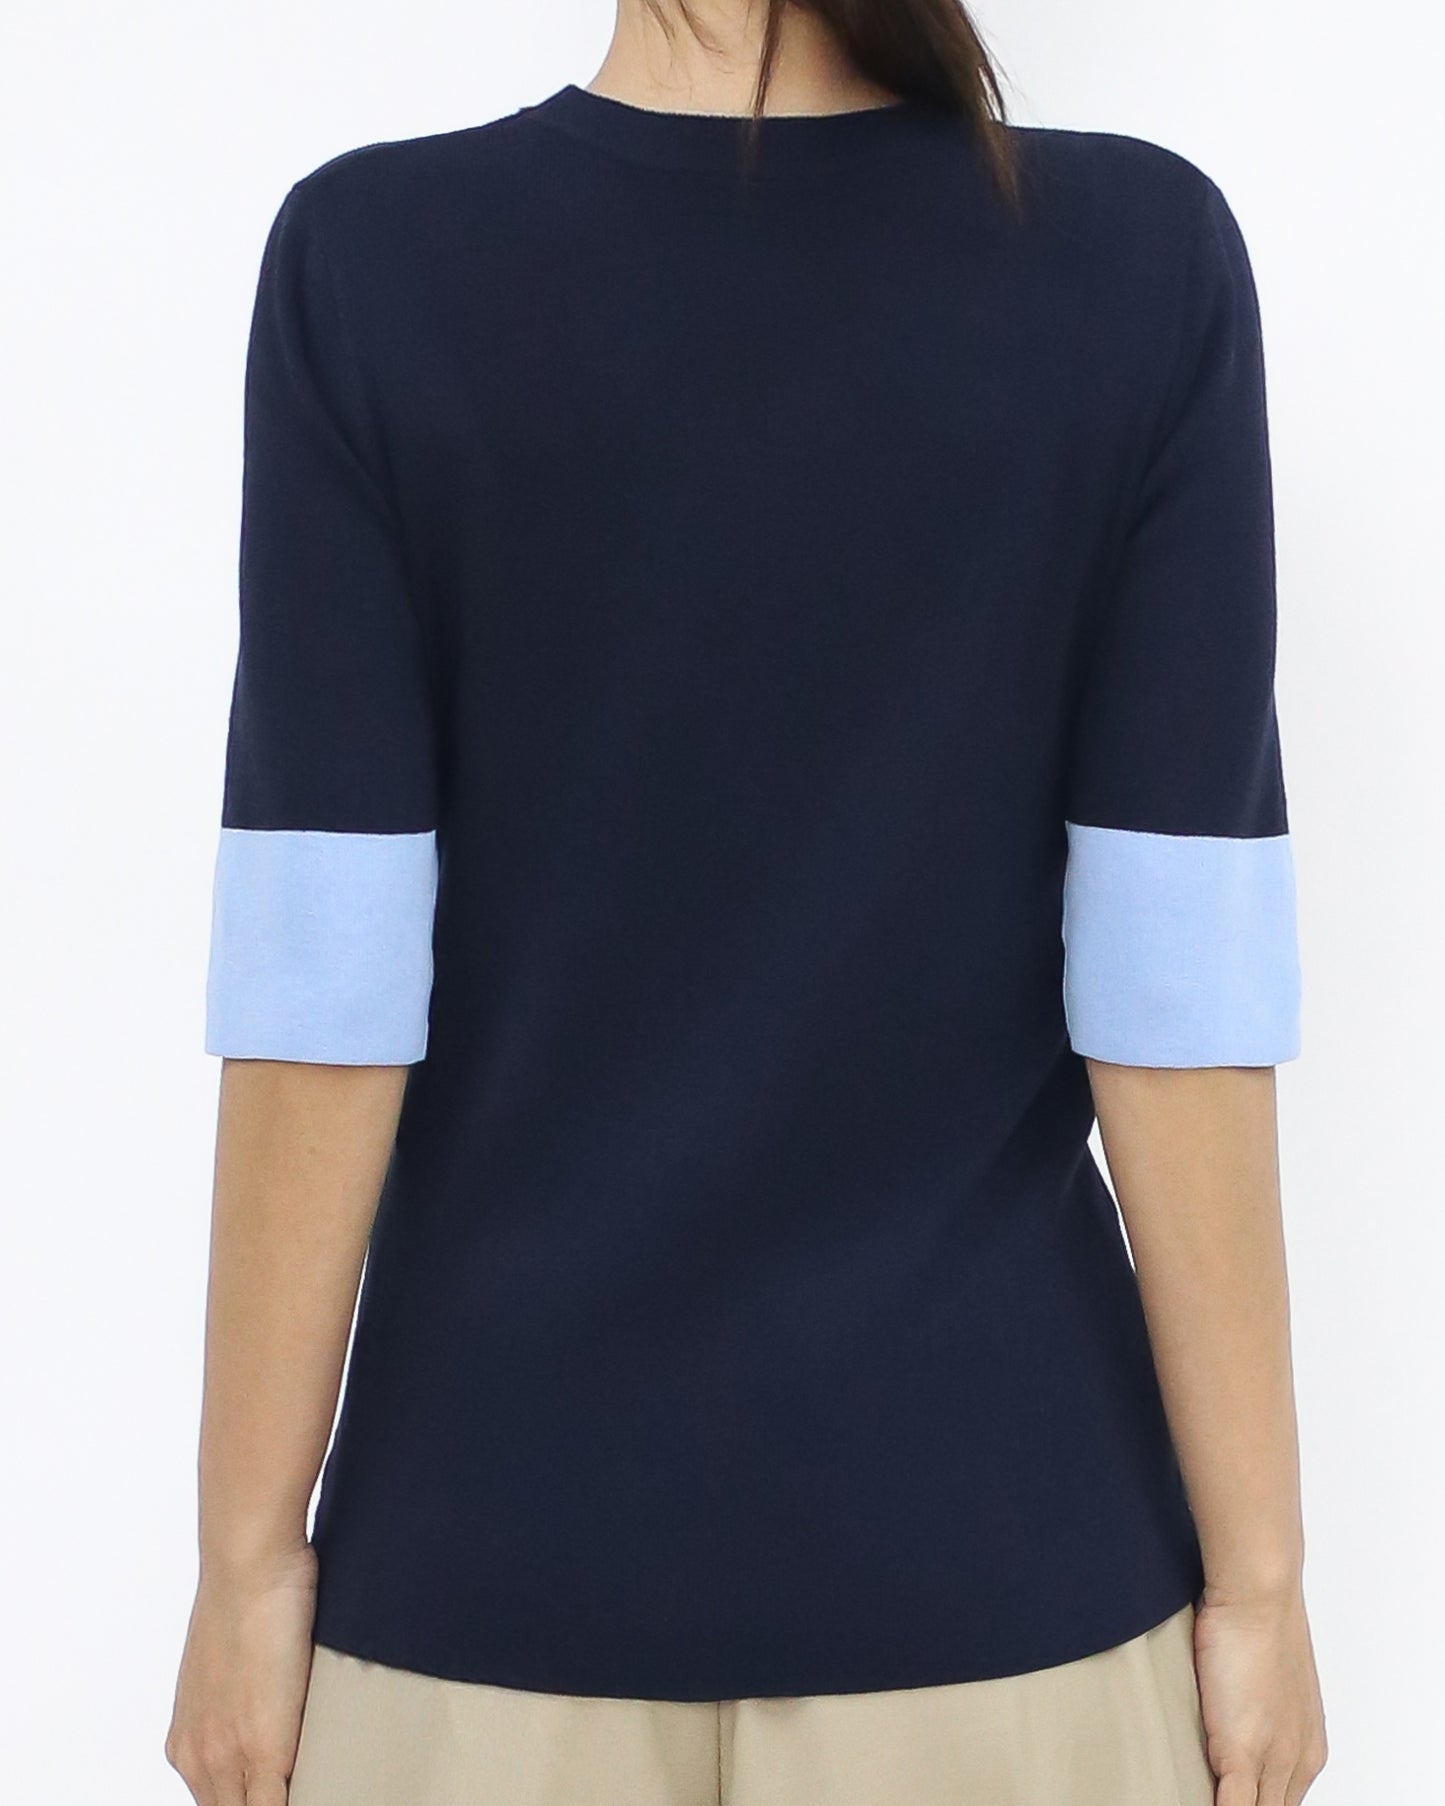 navy & blue contrast fine knitted top